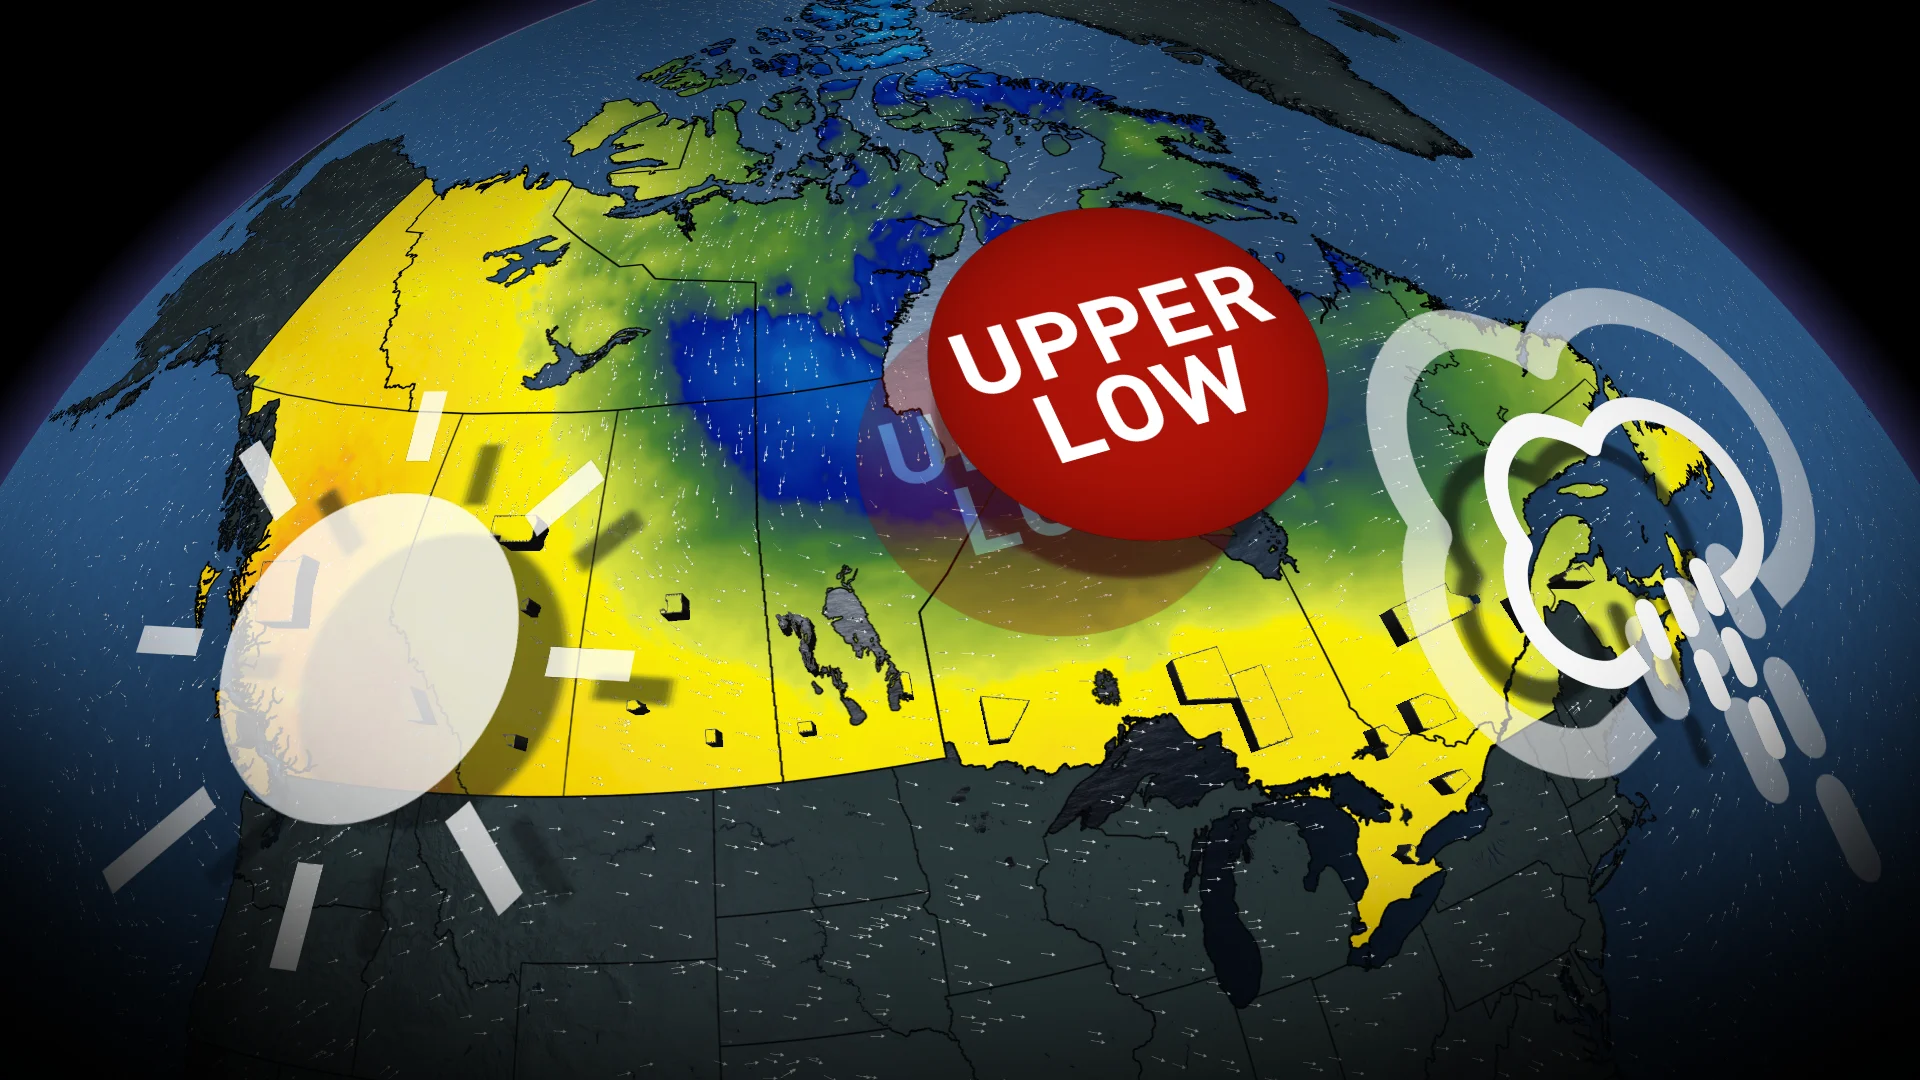 An early fall isn’t in the cards for B.C. See the hot and dry trend continuing for August, here